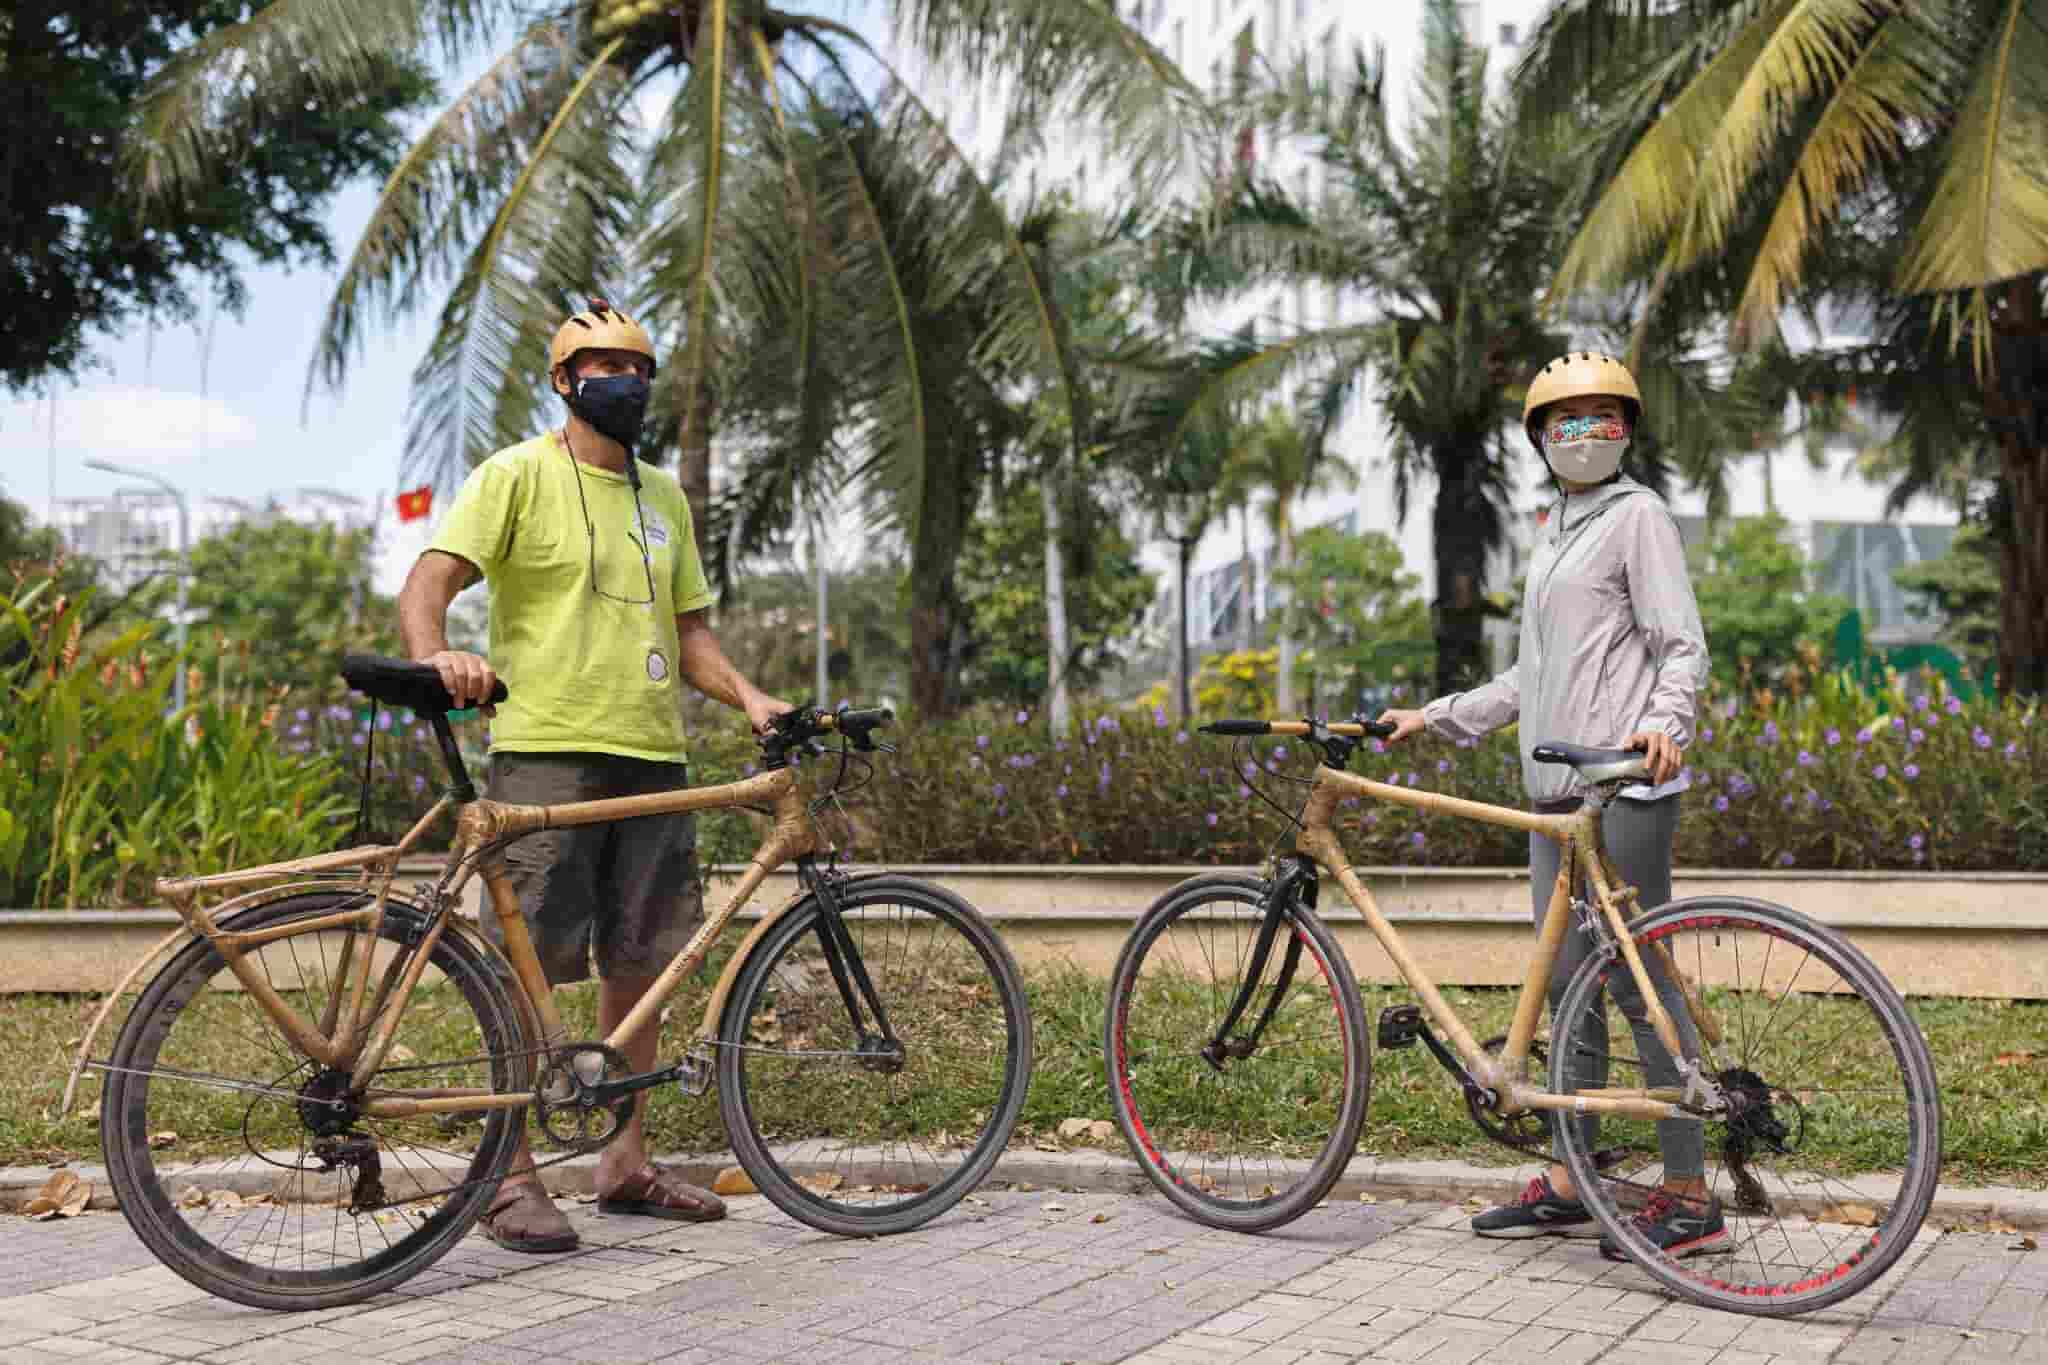 Two cyclists pose with their bamboo bicycles made by Mekong Quilts. Photo by Mervin Lee